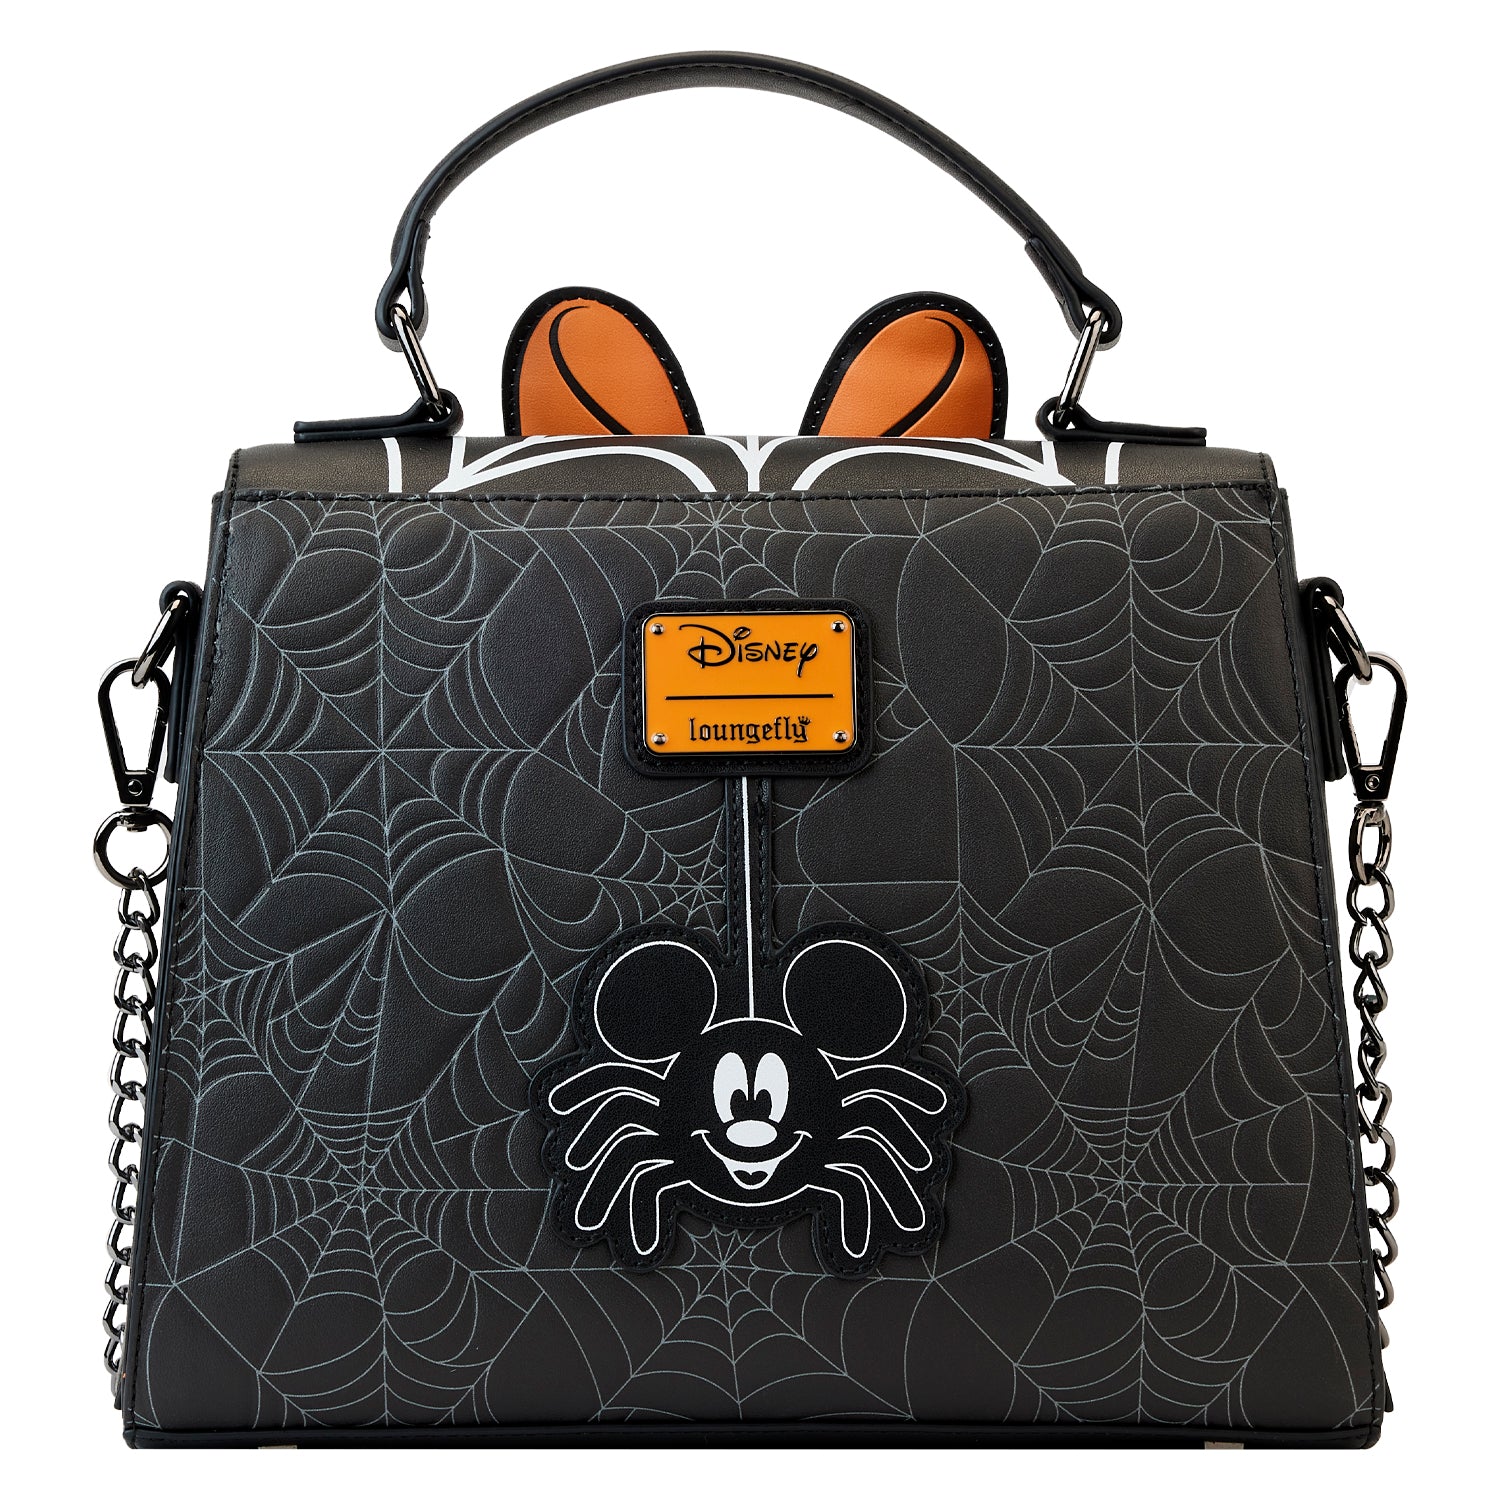 Loungefly Disney Mickey And Minnie tote from Hot Topic - Inside the Magic |  Minnie tote, Disney purse, Disney bag